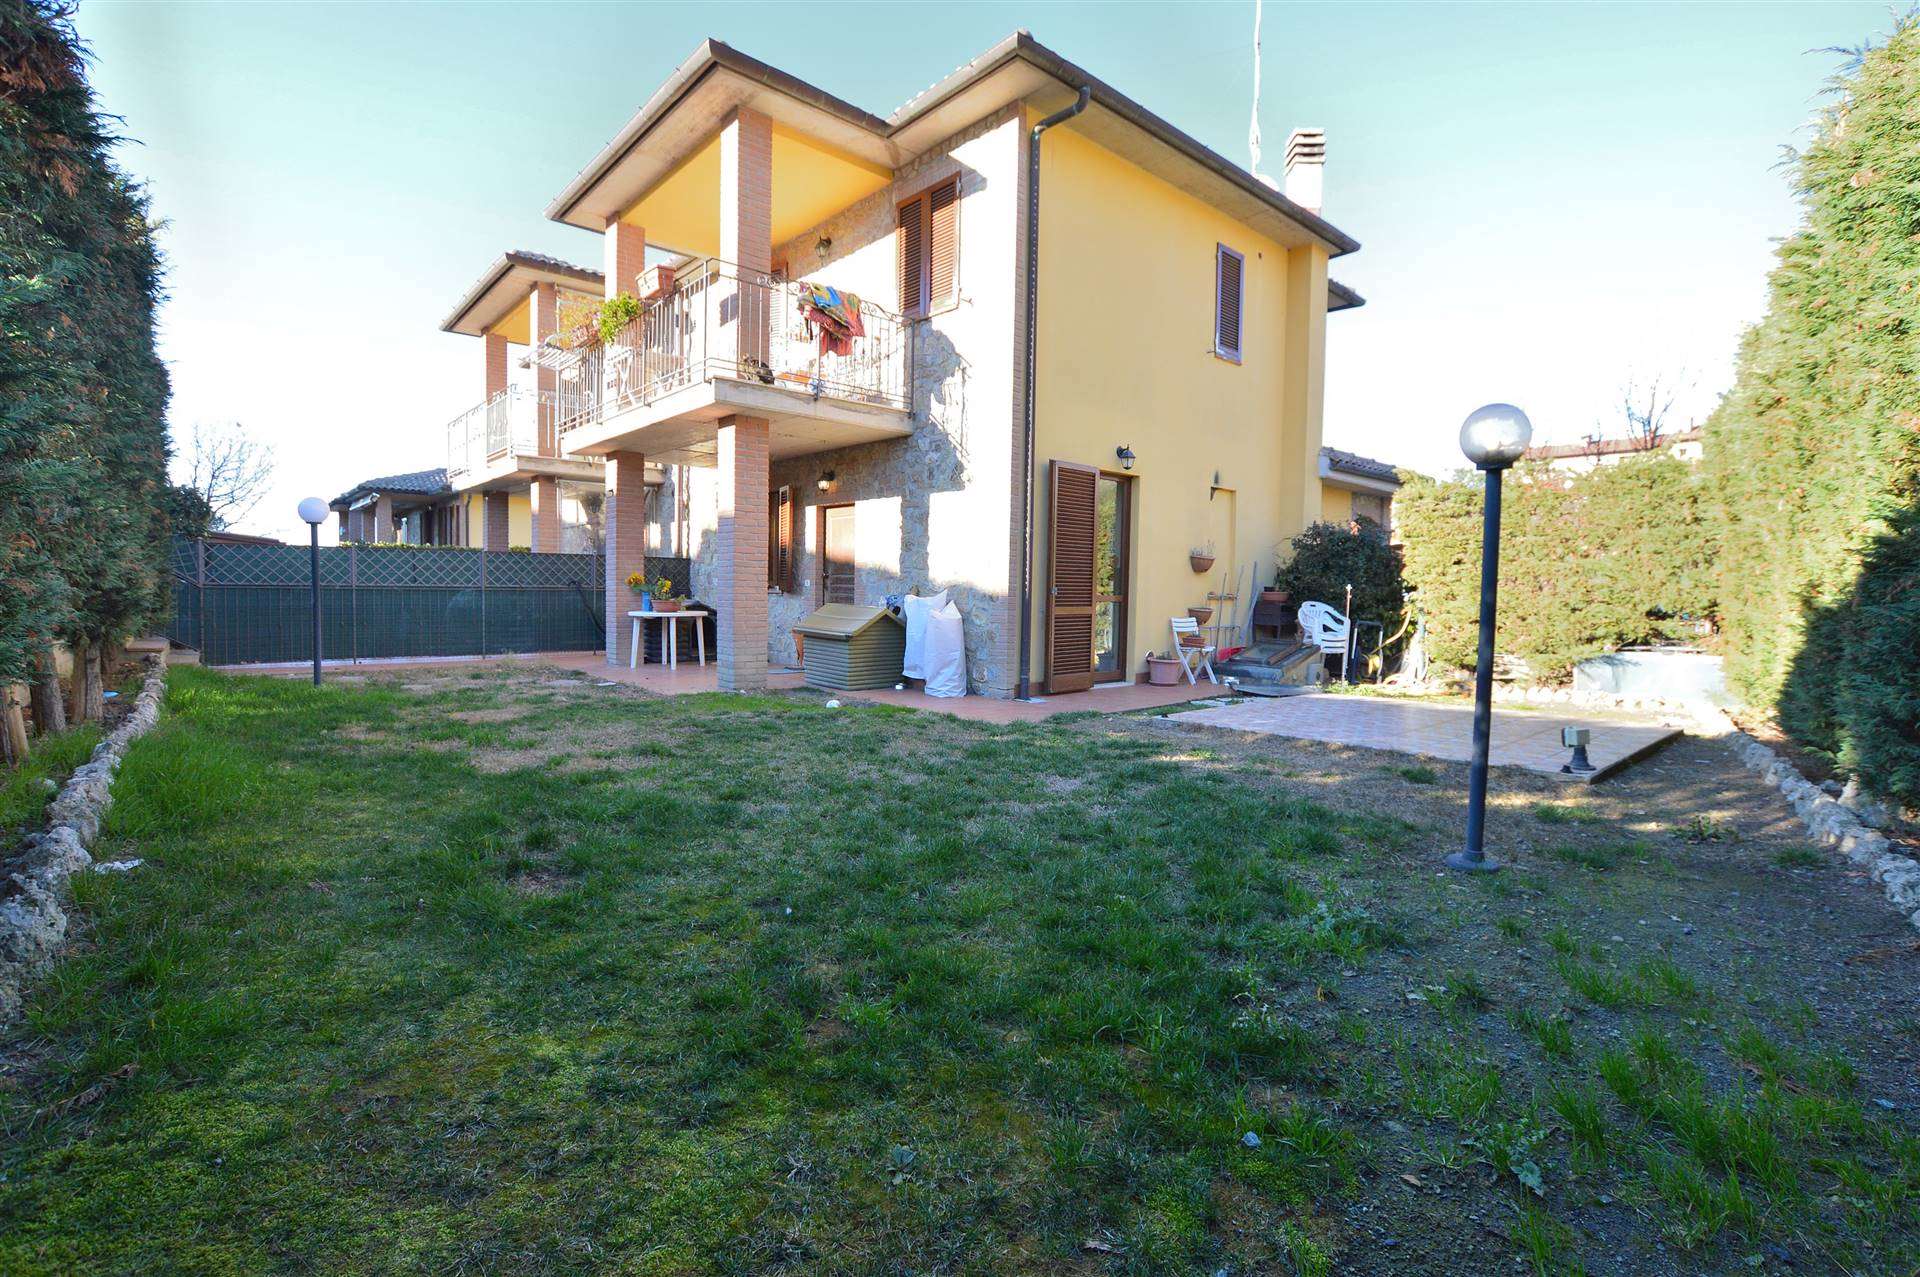 CASCIANO DI MURLO, MURLO, Terraced house for sale of 75 Sq. mt., Excellent Condition, Heating Individual heating system, Energetic class: G, Epi: 175 